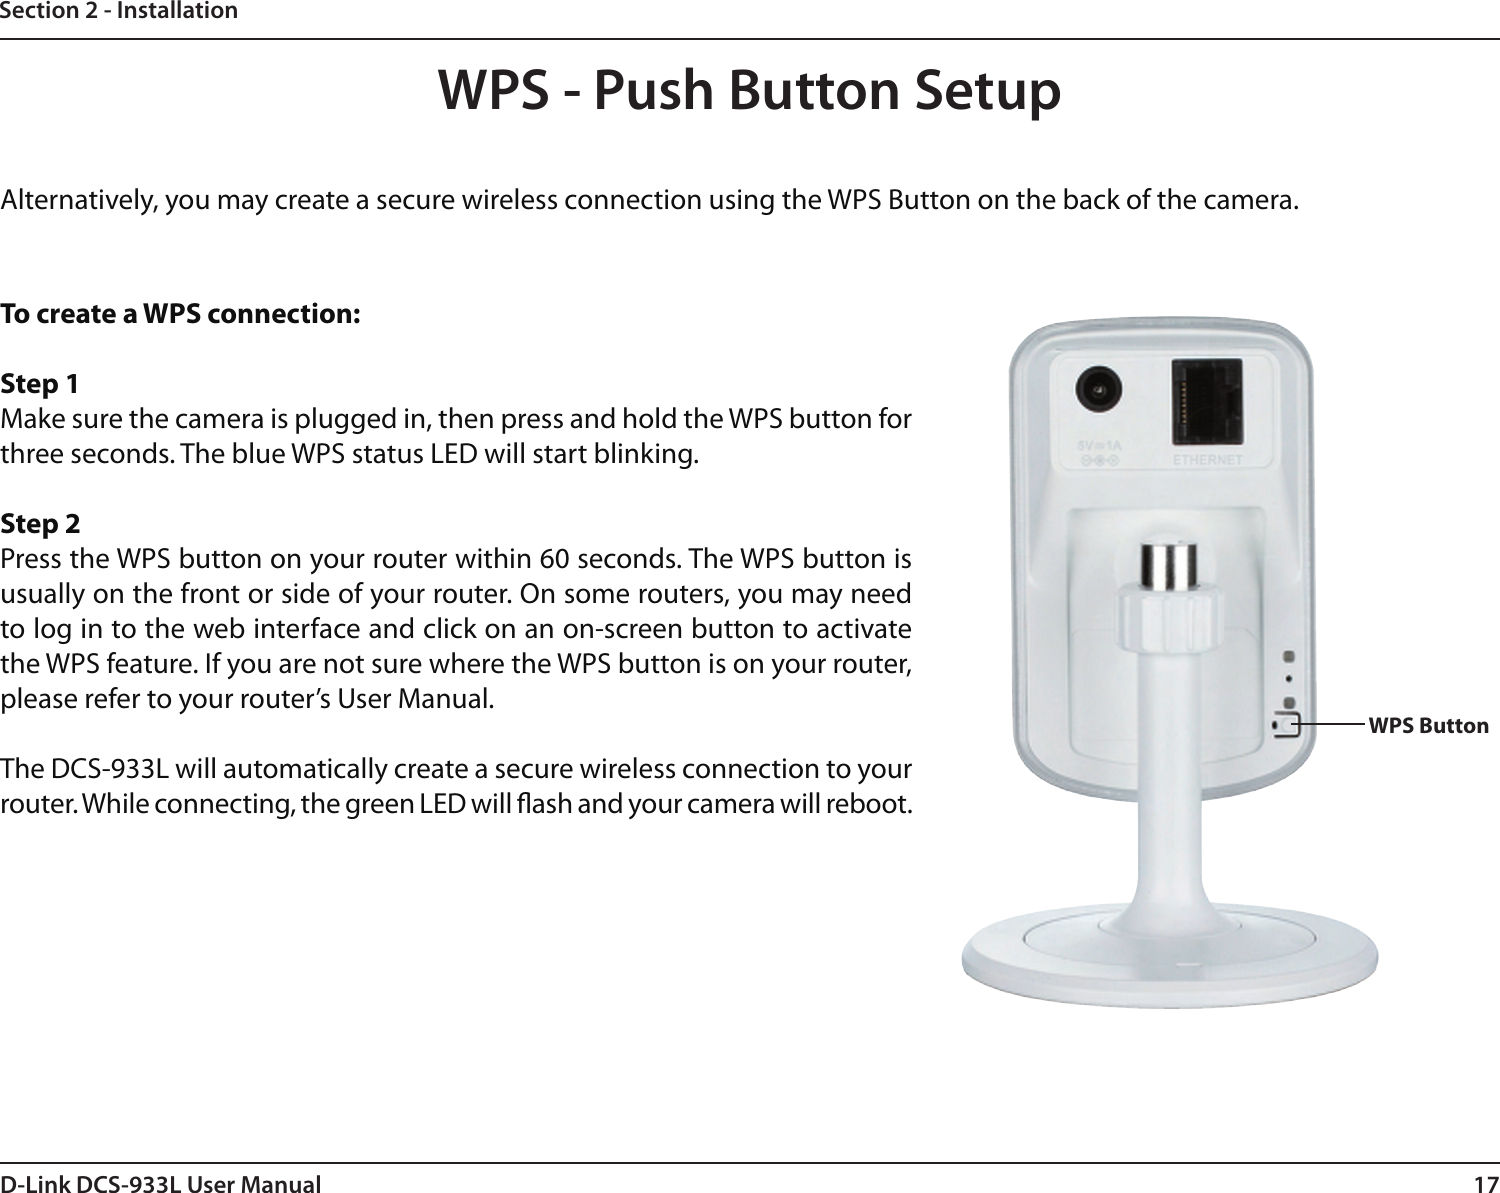 17D-Link DCS-933L User ManualSection 2 - InstallationTo create a WPS connection:Step 1Make sure the camera is plugged in, then press and hold the WPS button for three seconds. The blue WPS status LED will start blinking.Step 2Press the WPS button on your router within 60 seconds. The WPS button is usually on the front or side of your router. On some routers, you may need to log in to the web interface and click on an on-screen button to activate the WPS feature. If you are not sure where the WPS button is on your router, please refer to your router’s User Manual.The DCS-933L will automatically create a secure wireless connection to your router. While connecting, the green LED will ash and your camera will reboot.WPS - Push Button SetupWPS ButtonAlternatively, you may create a secure wireless connection using the WPS Button on the back of the camera.